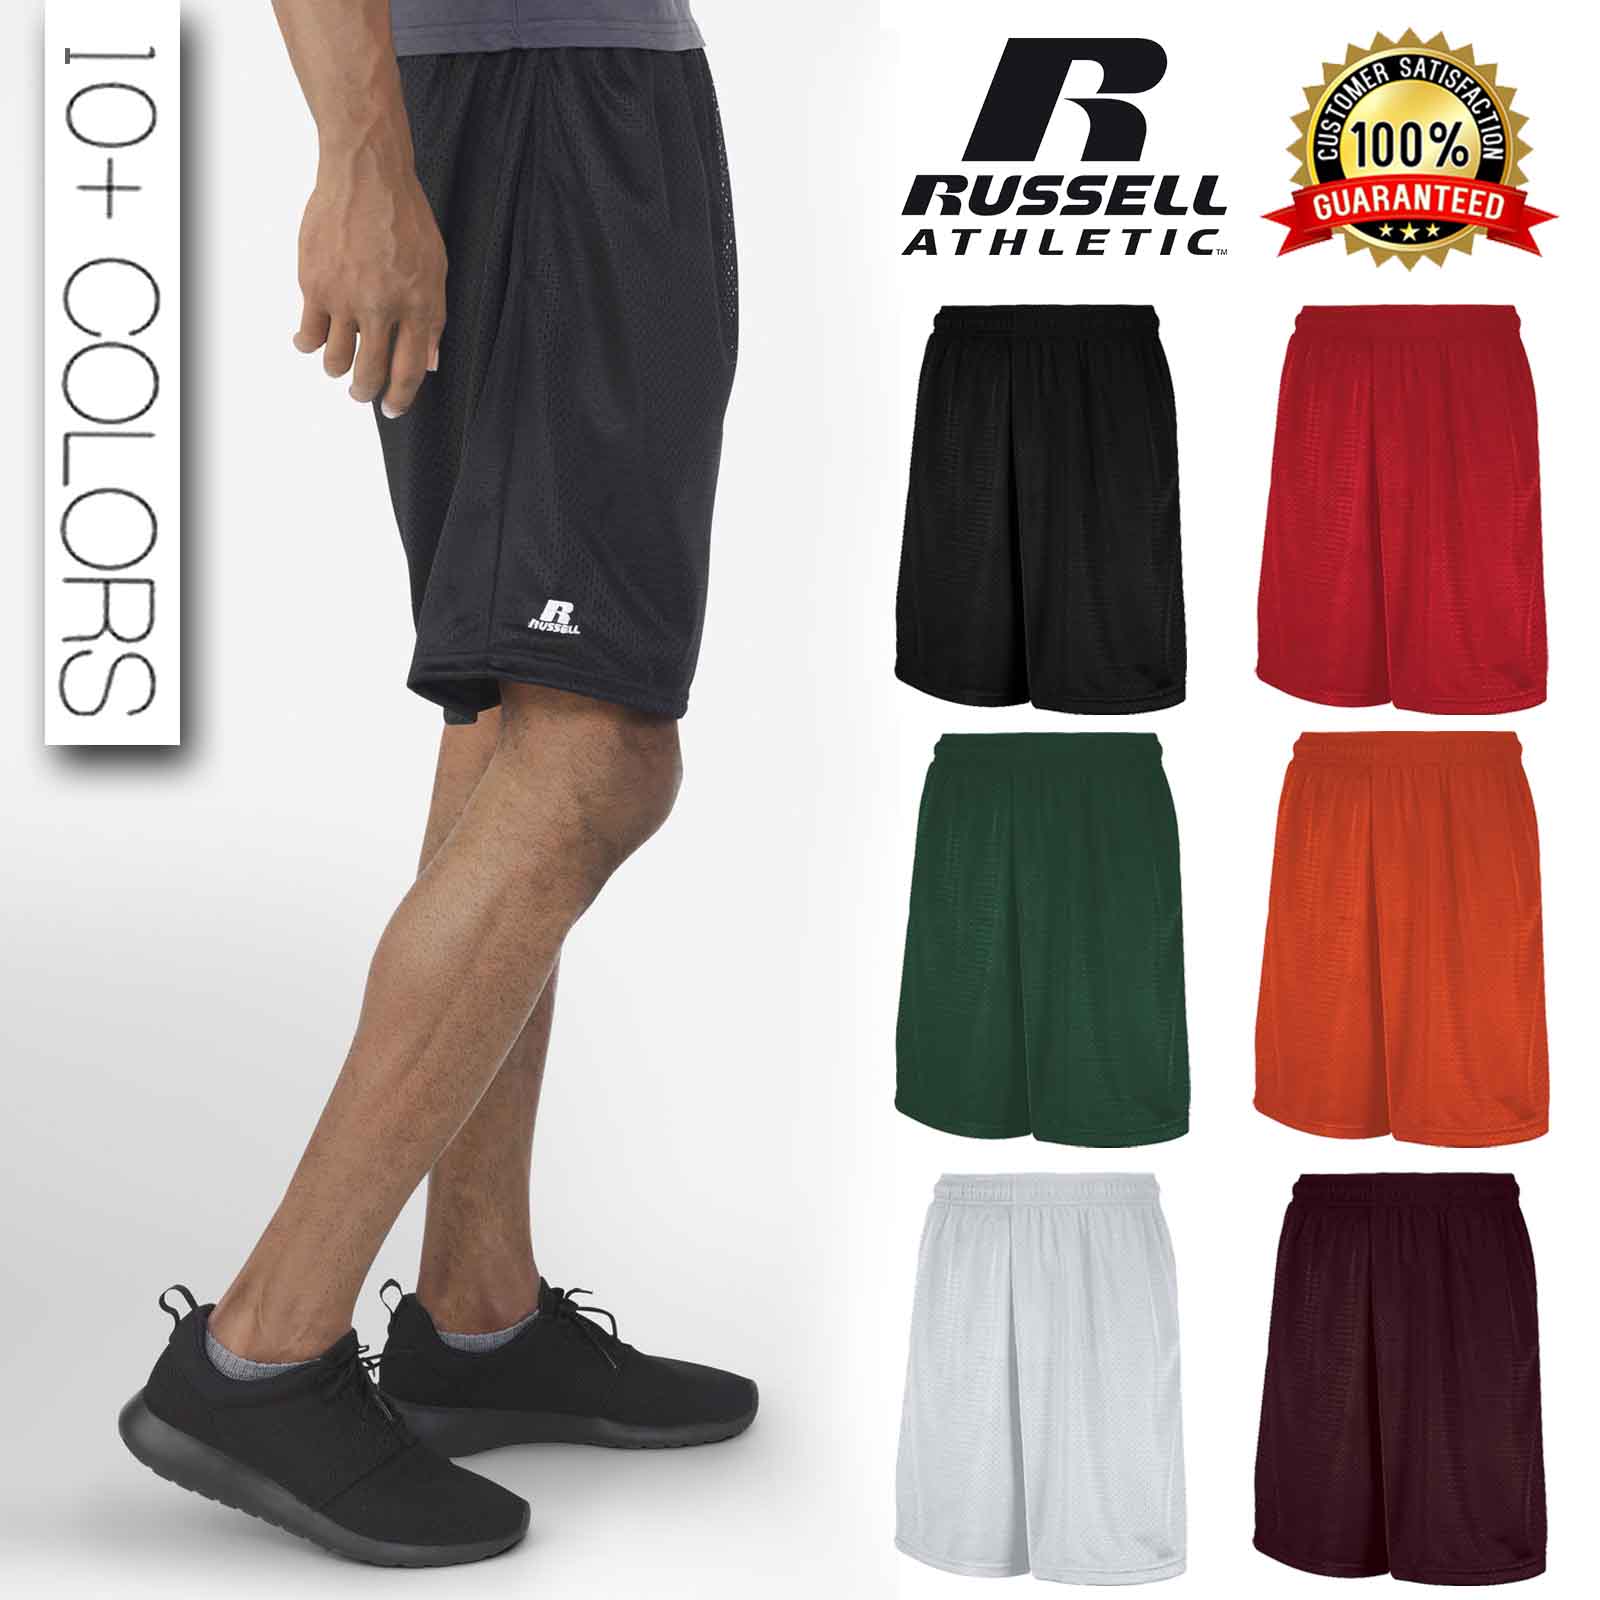 Russell Athletic Pants Size Chart